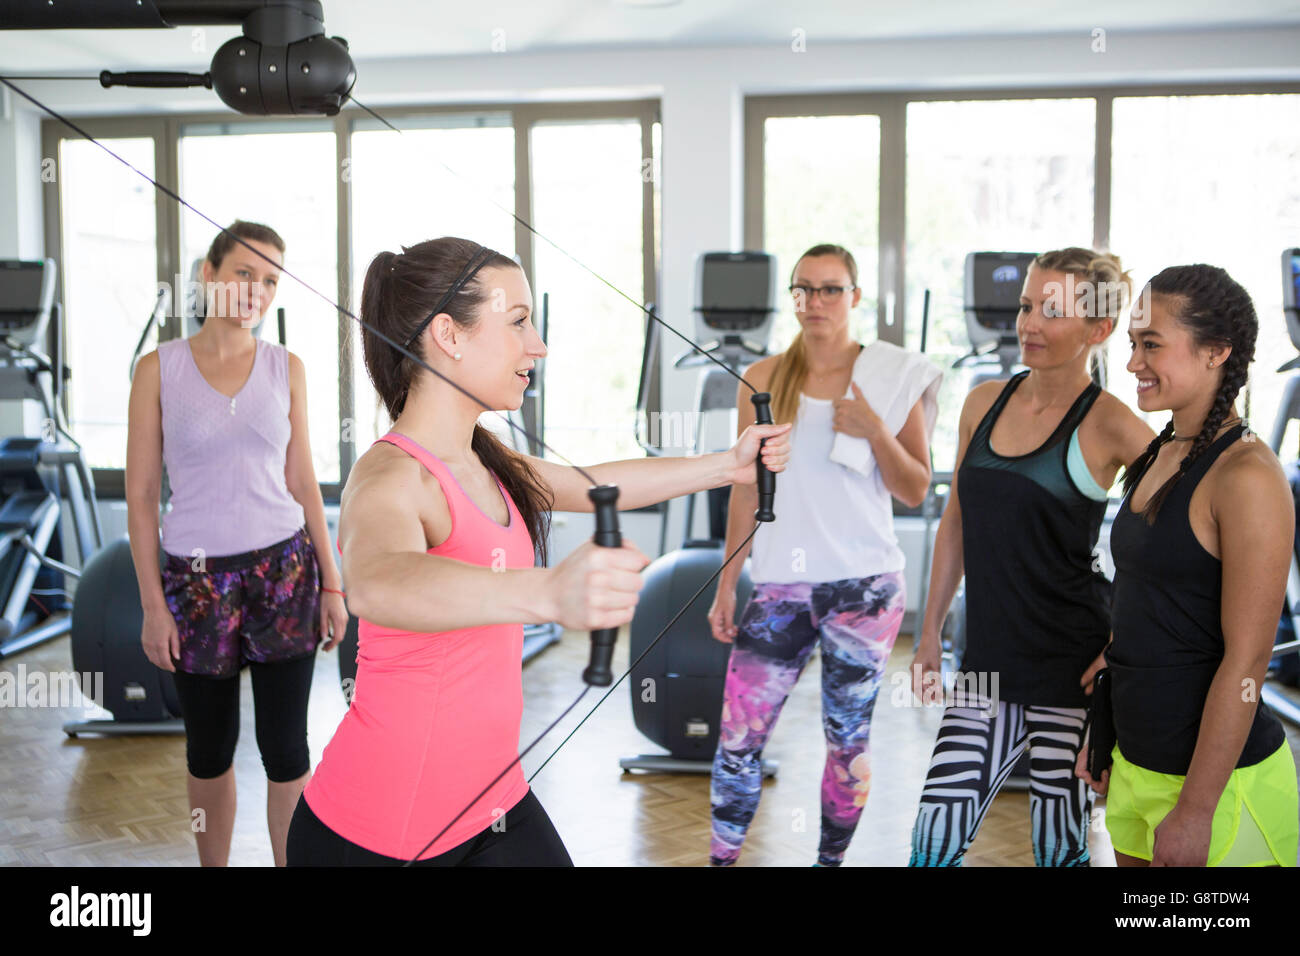 Fitness instructor shows women how to perform a suspension exercise Stock Photo